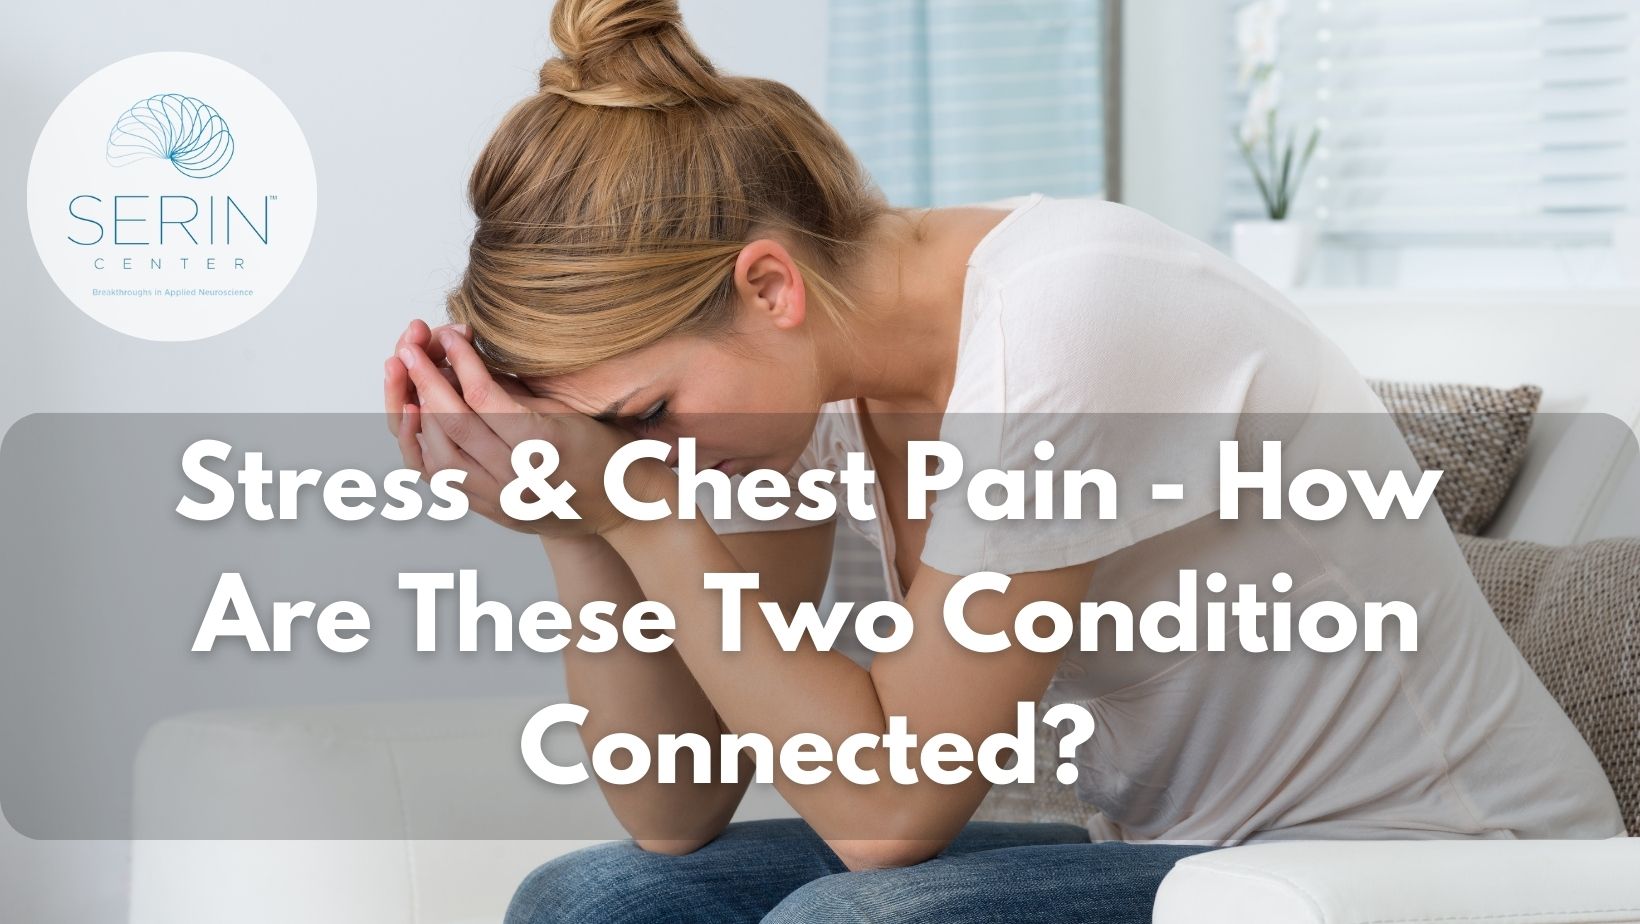 The connection between stress and chest pain.